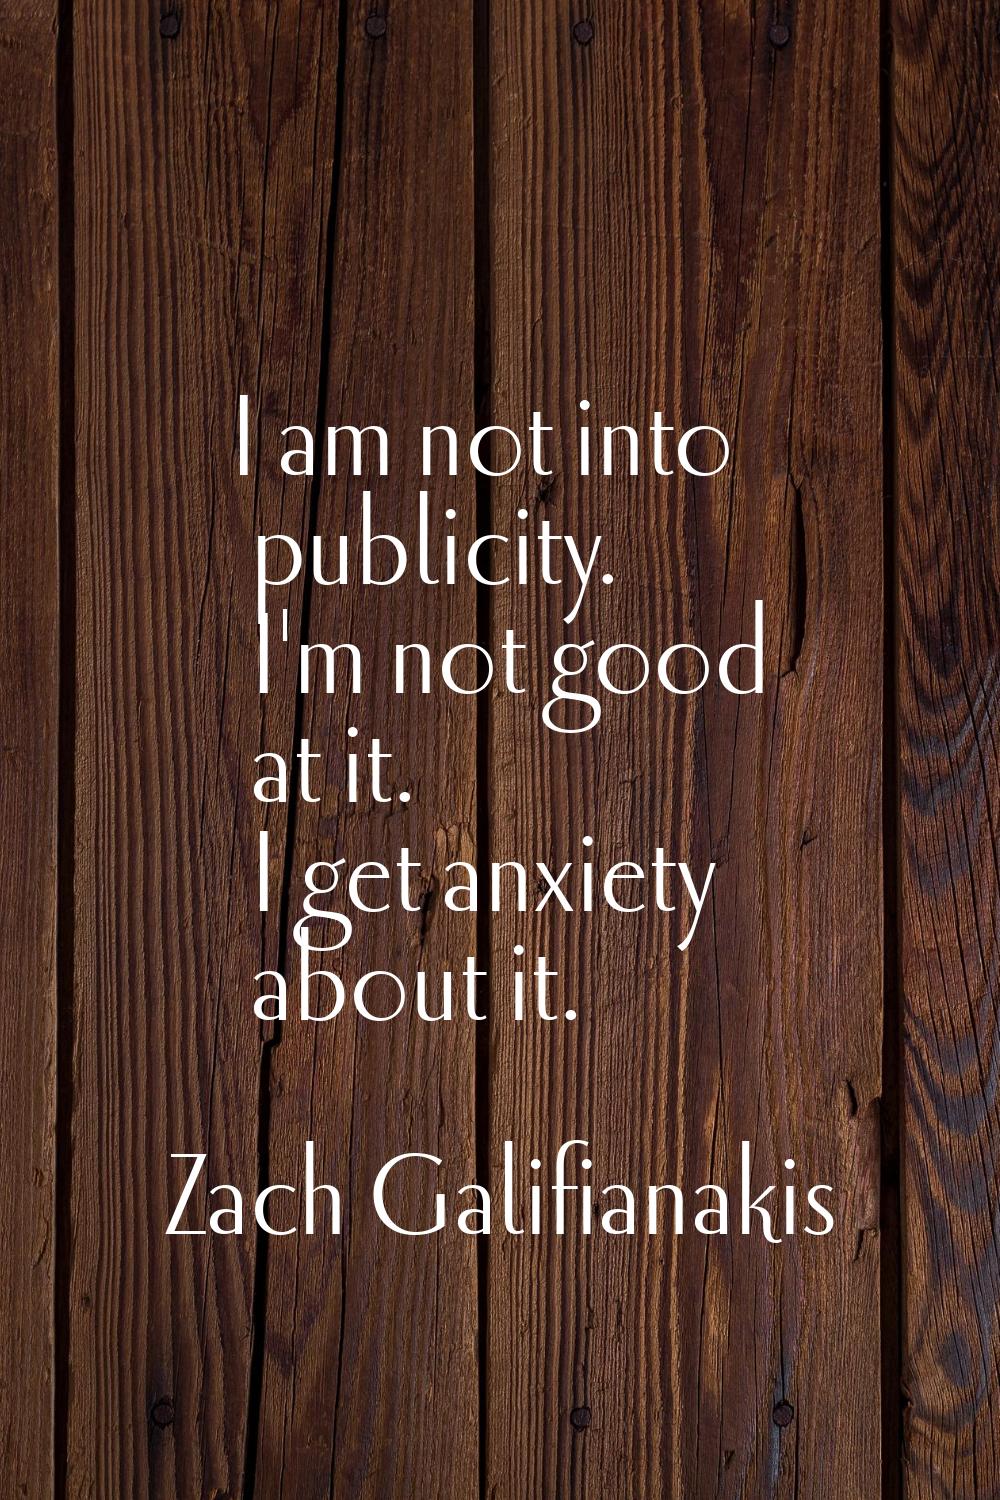 I am not into publicity. I'm not good at it. I get anxiety about it.